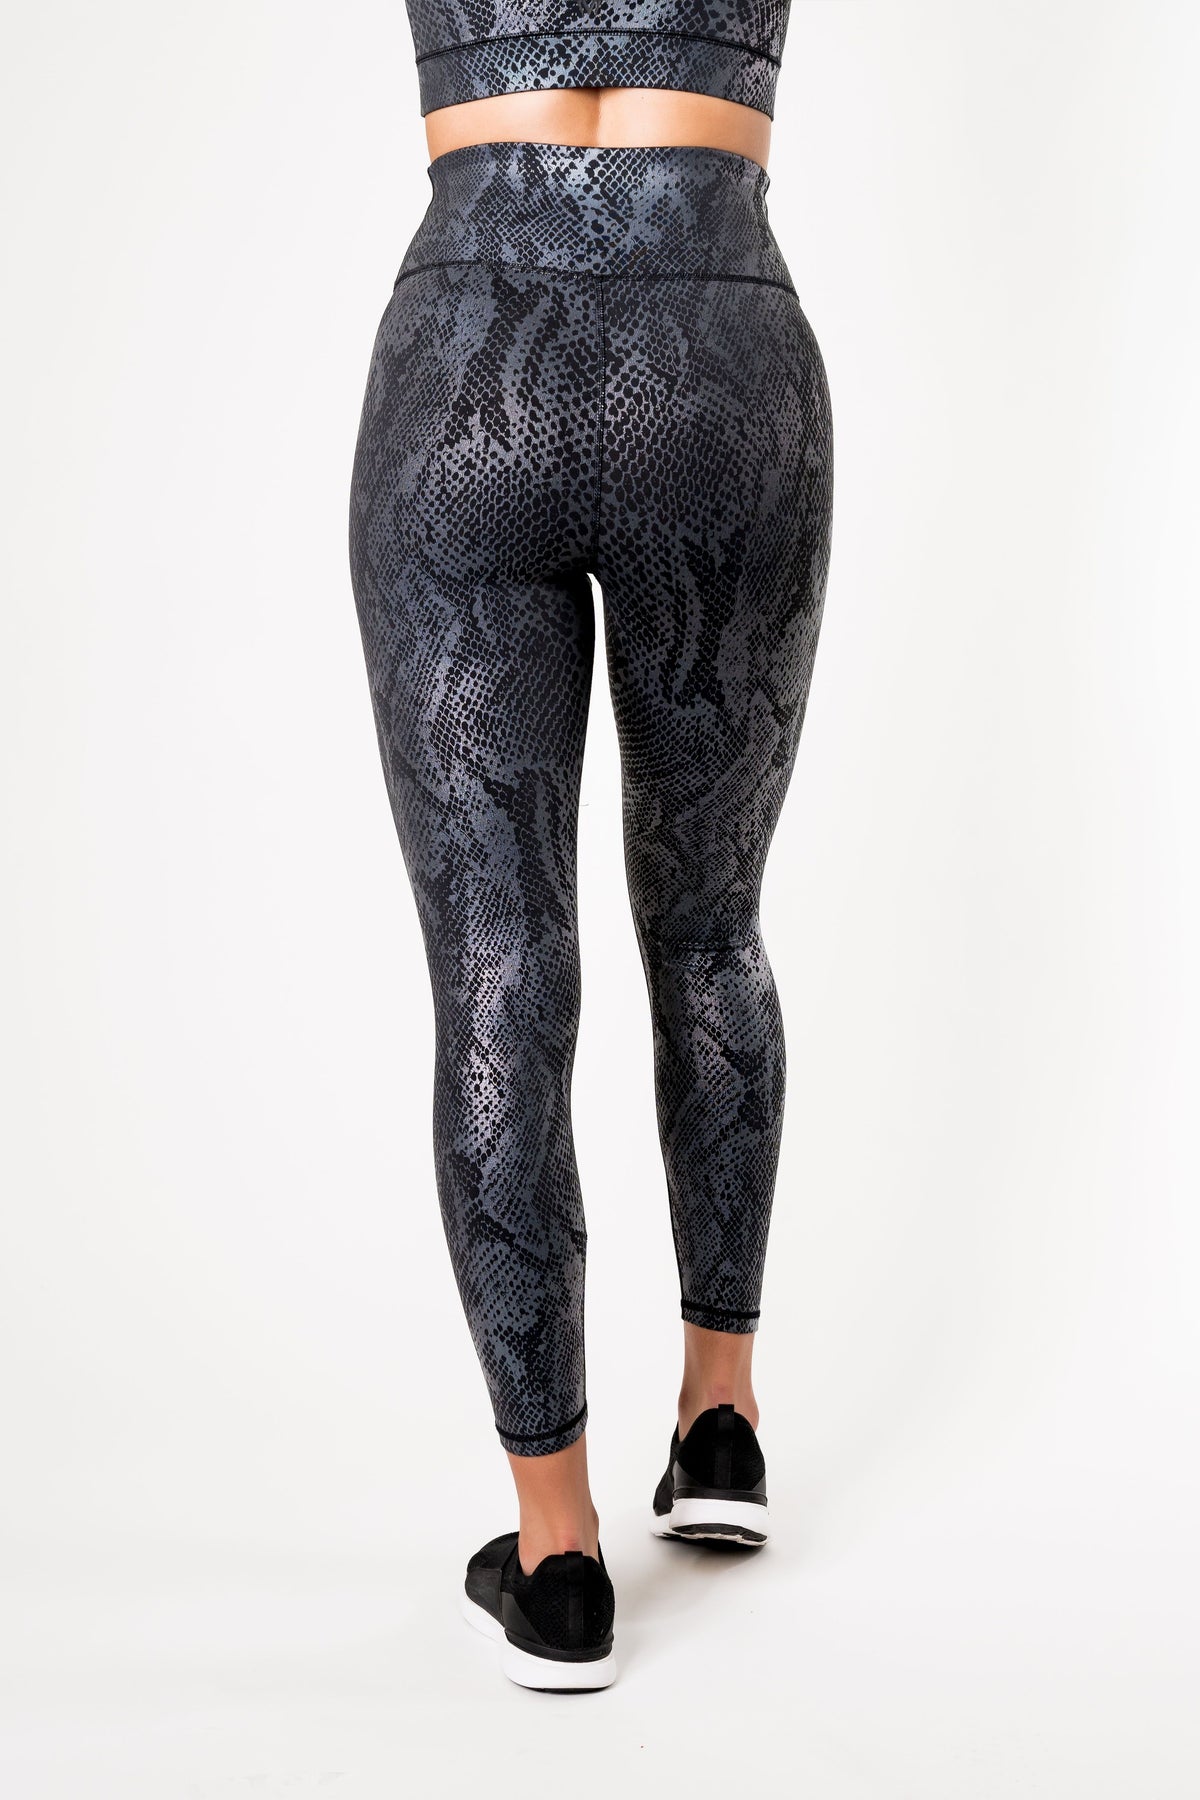 Technically Fashion | Collagen-Infused Fashion-Forward Activewear – IVL ...